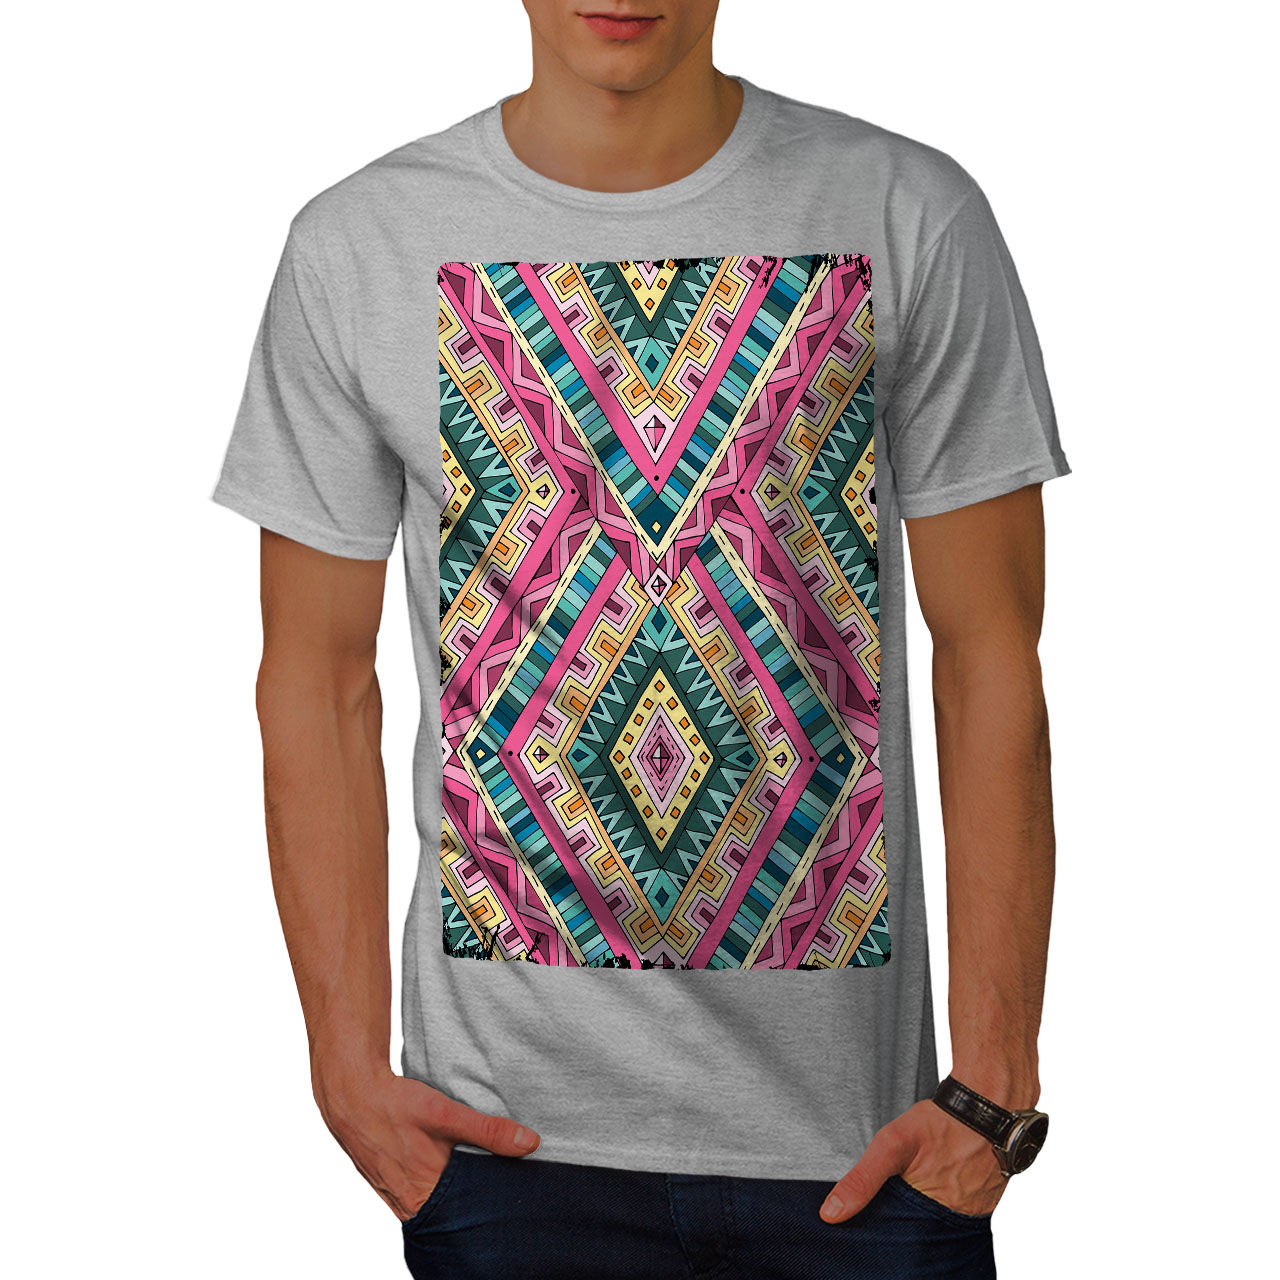 Wellcoda Psychedelic Pattern Mens T-shirt, Colorful Graphic Design ...